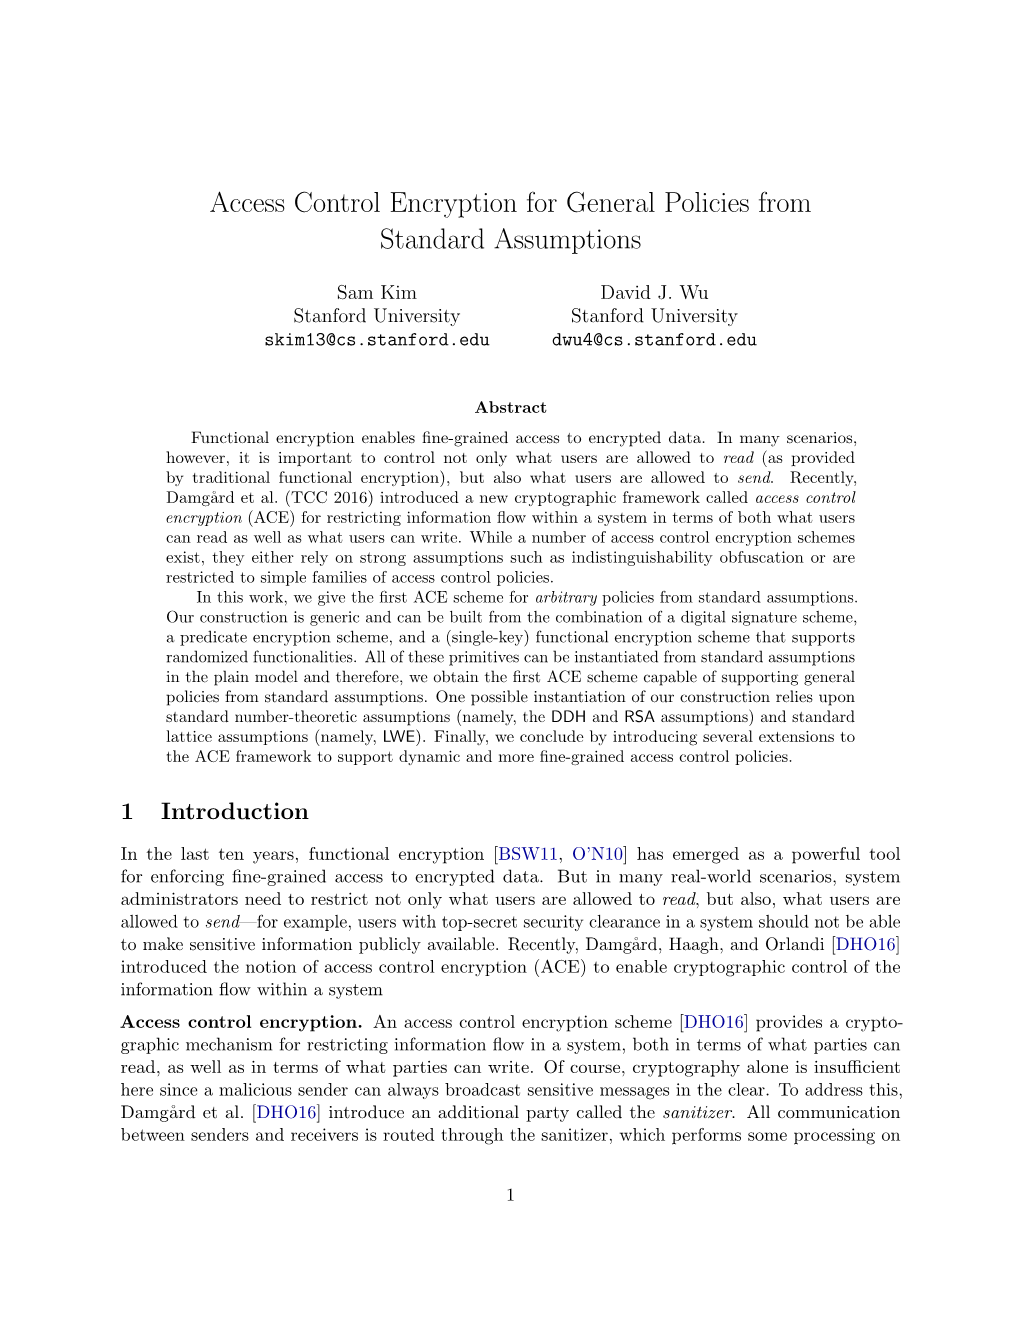 Access Control Encryption for General Policies from Standard Assumptions